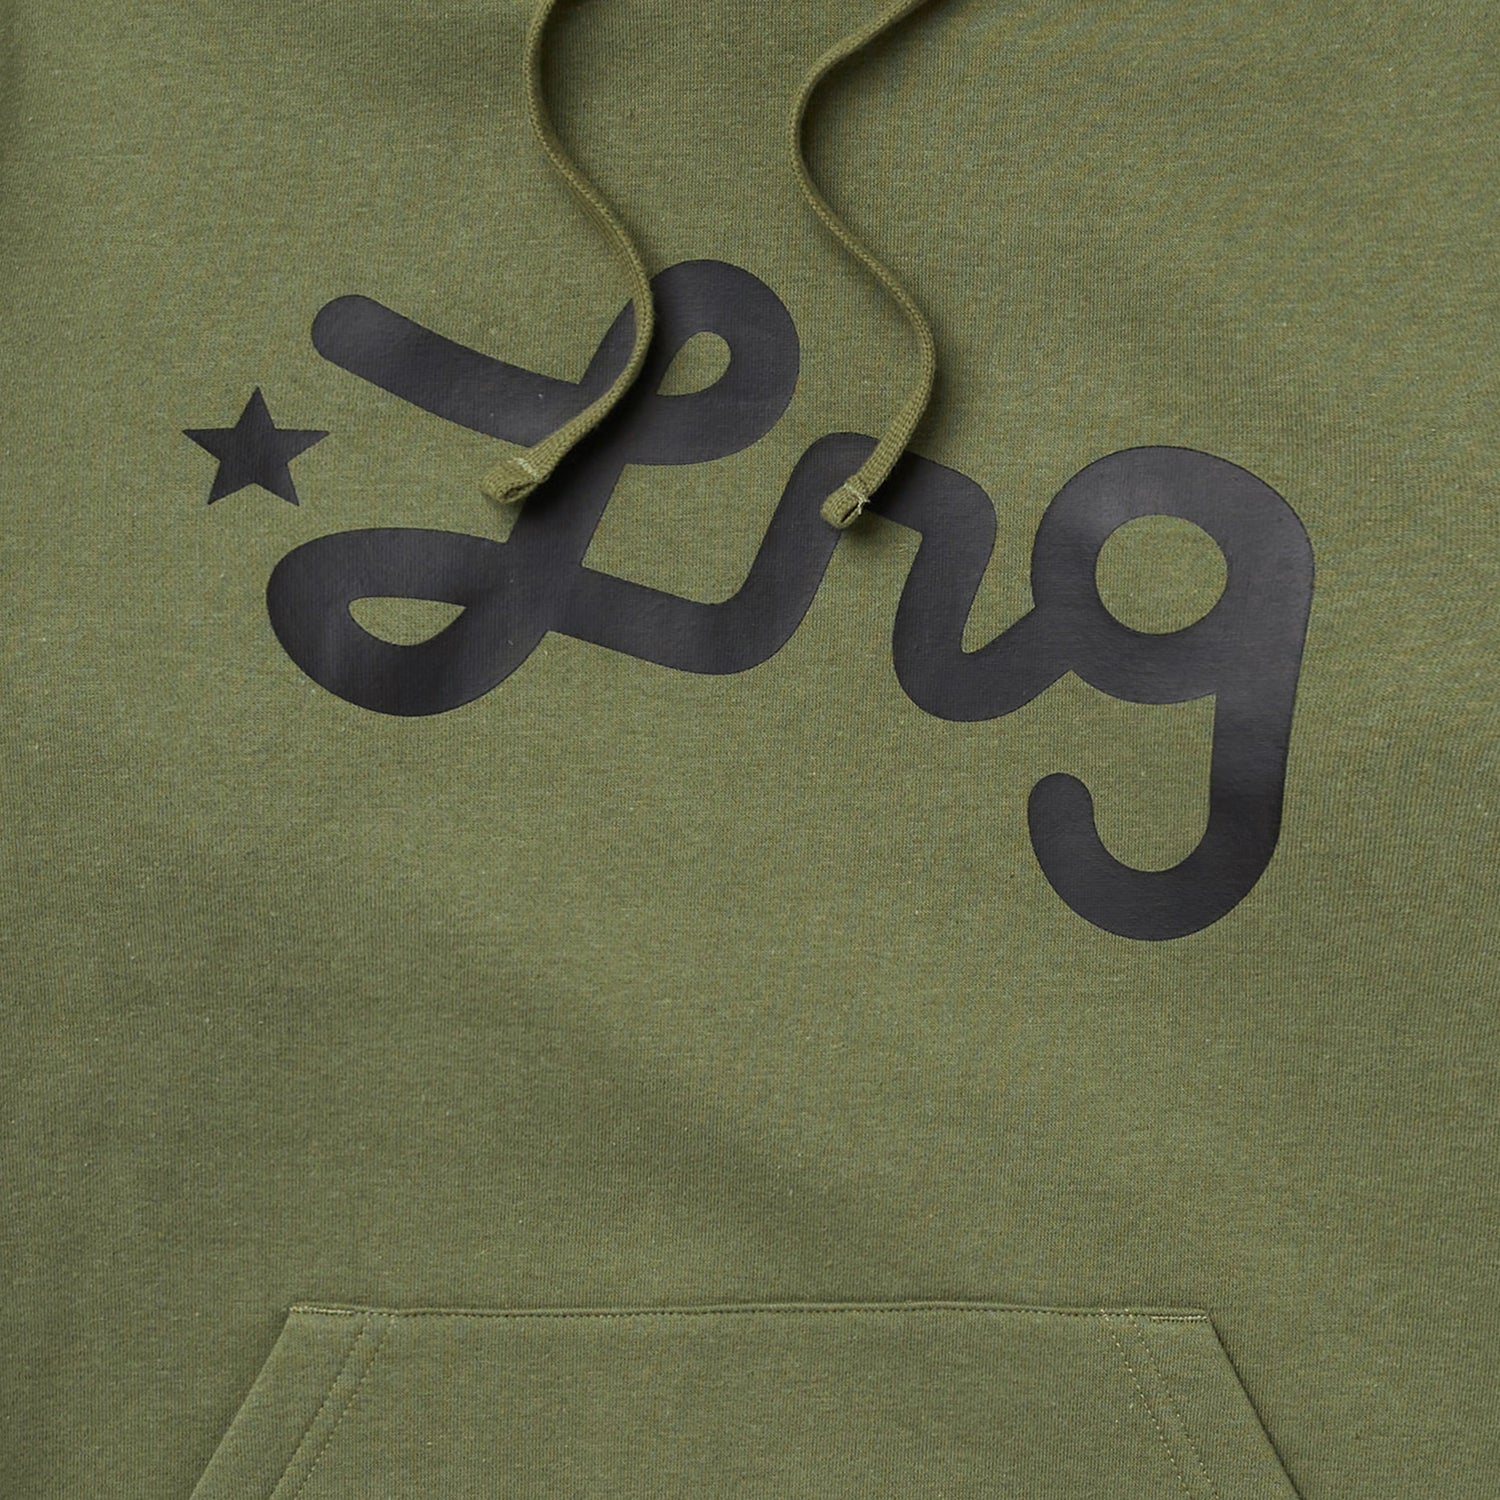 LIFTED SCRIPT PULLOVER HOODIE - OLIVE